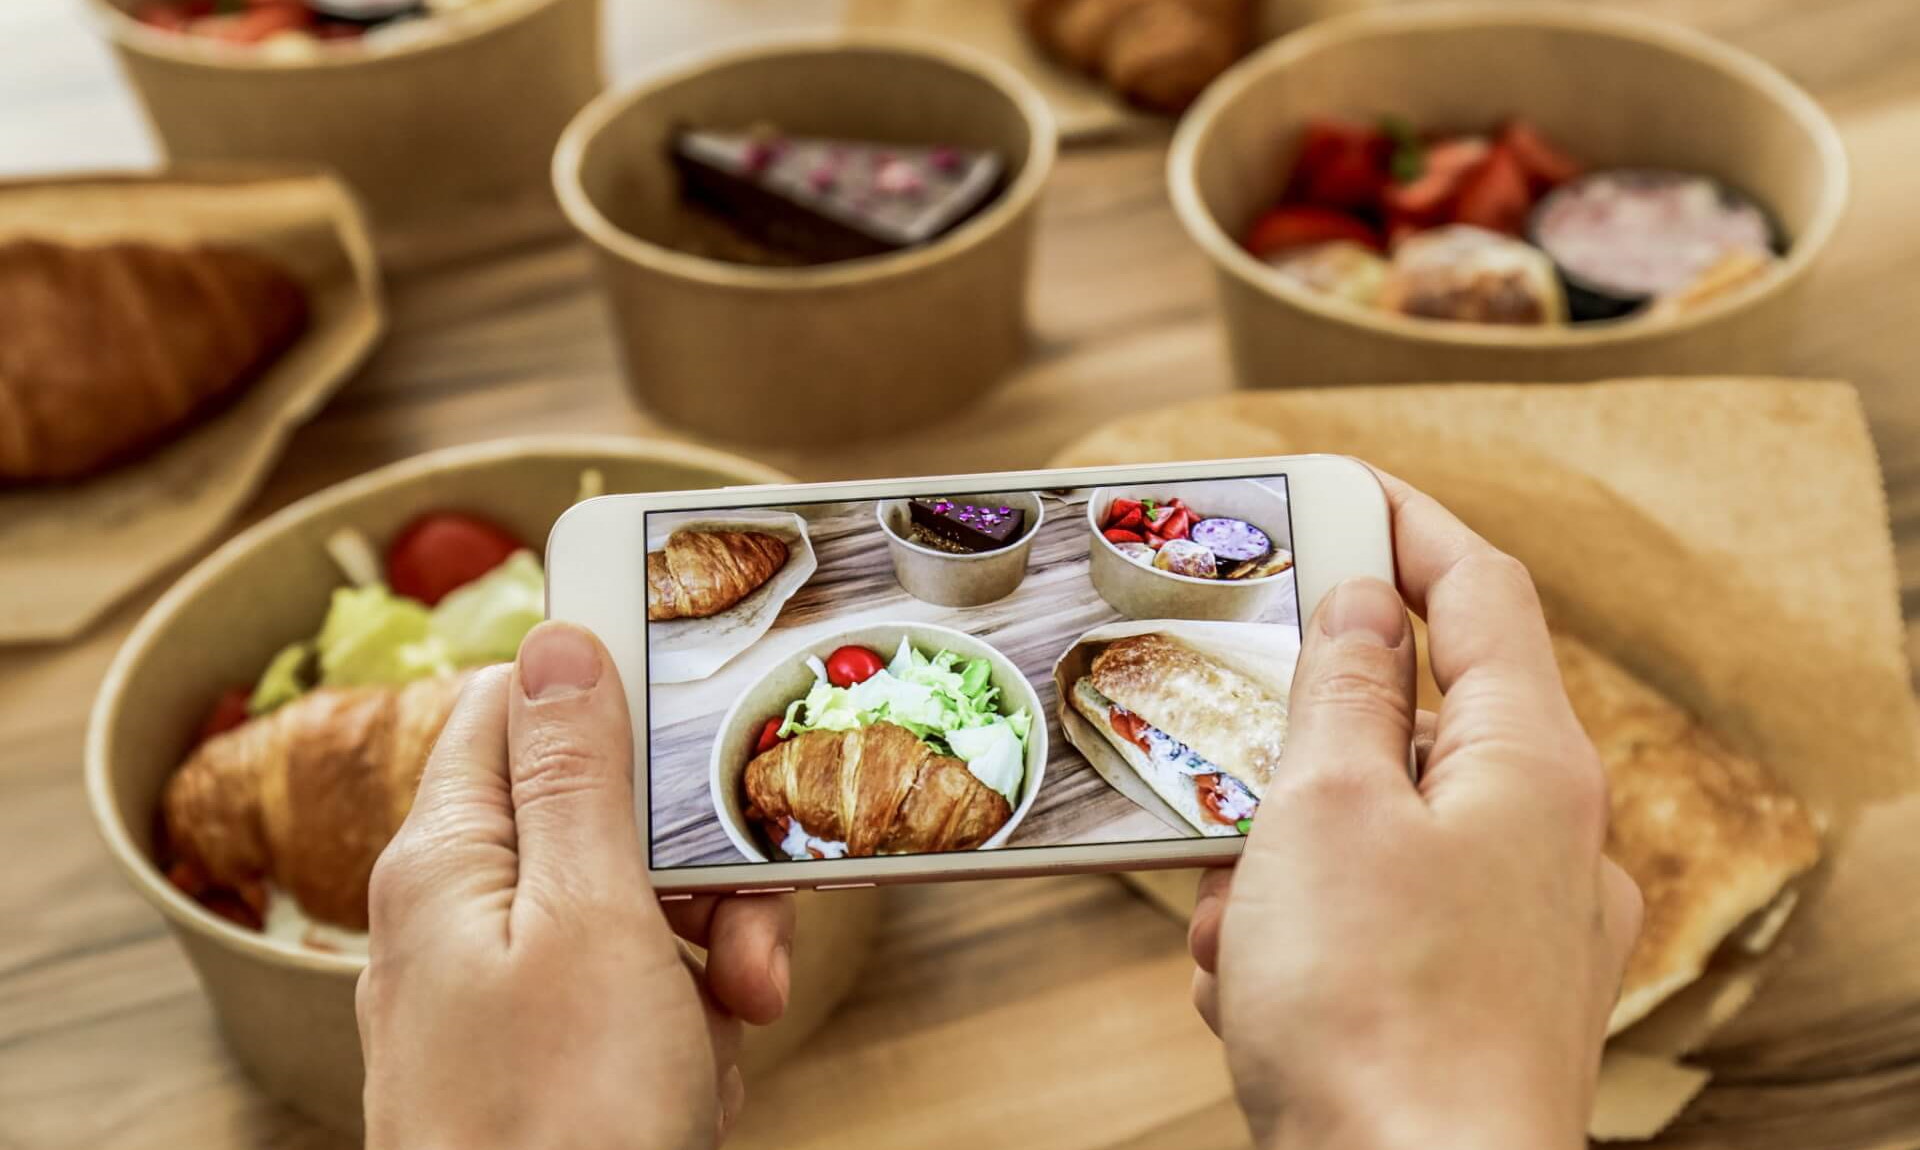 the new normal brings more connectivity into food. 